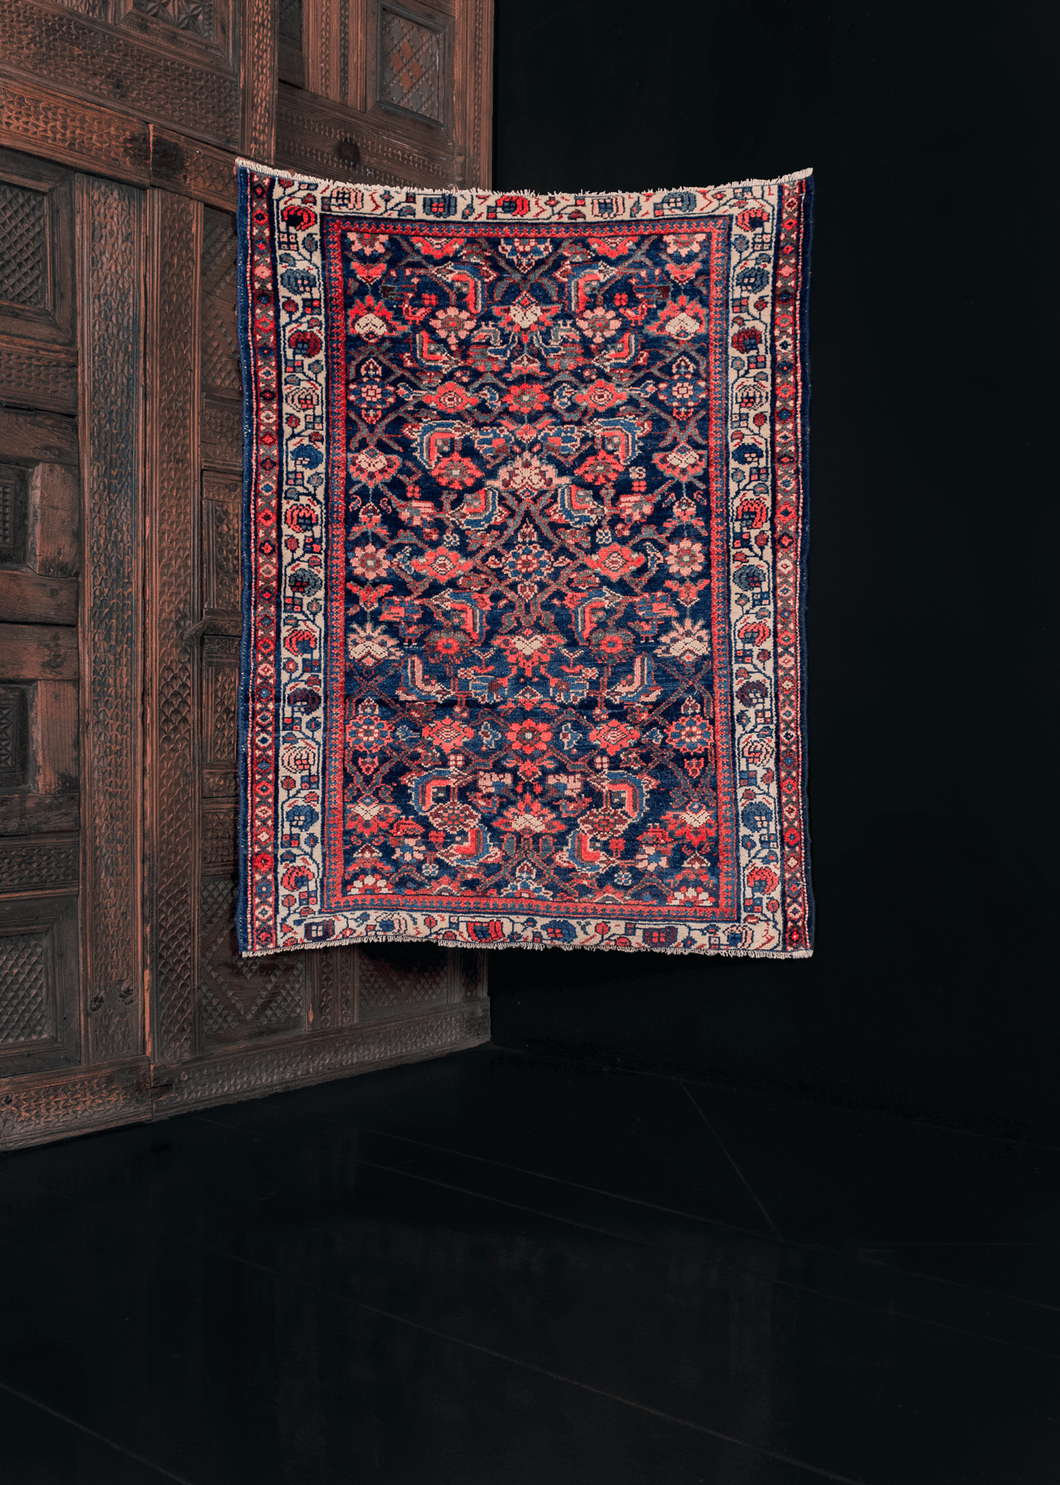 Hamadan rug with a deep blue indigo field and traditional leaf and blossom design, in bright red and soft ivory